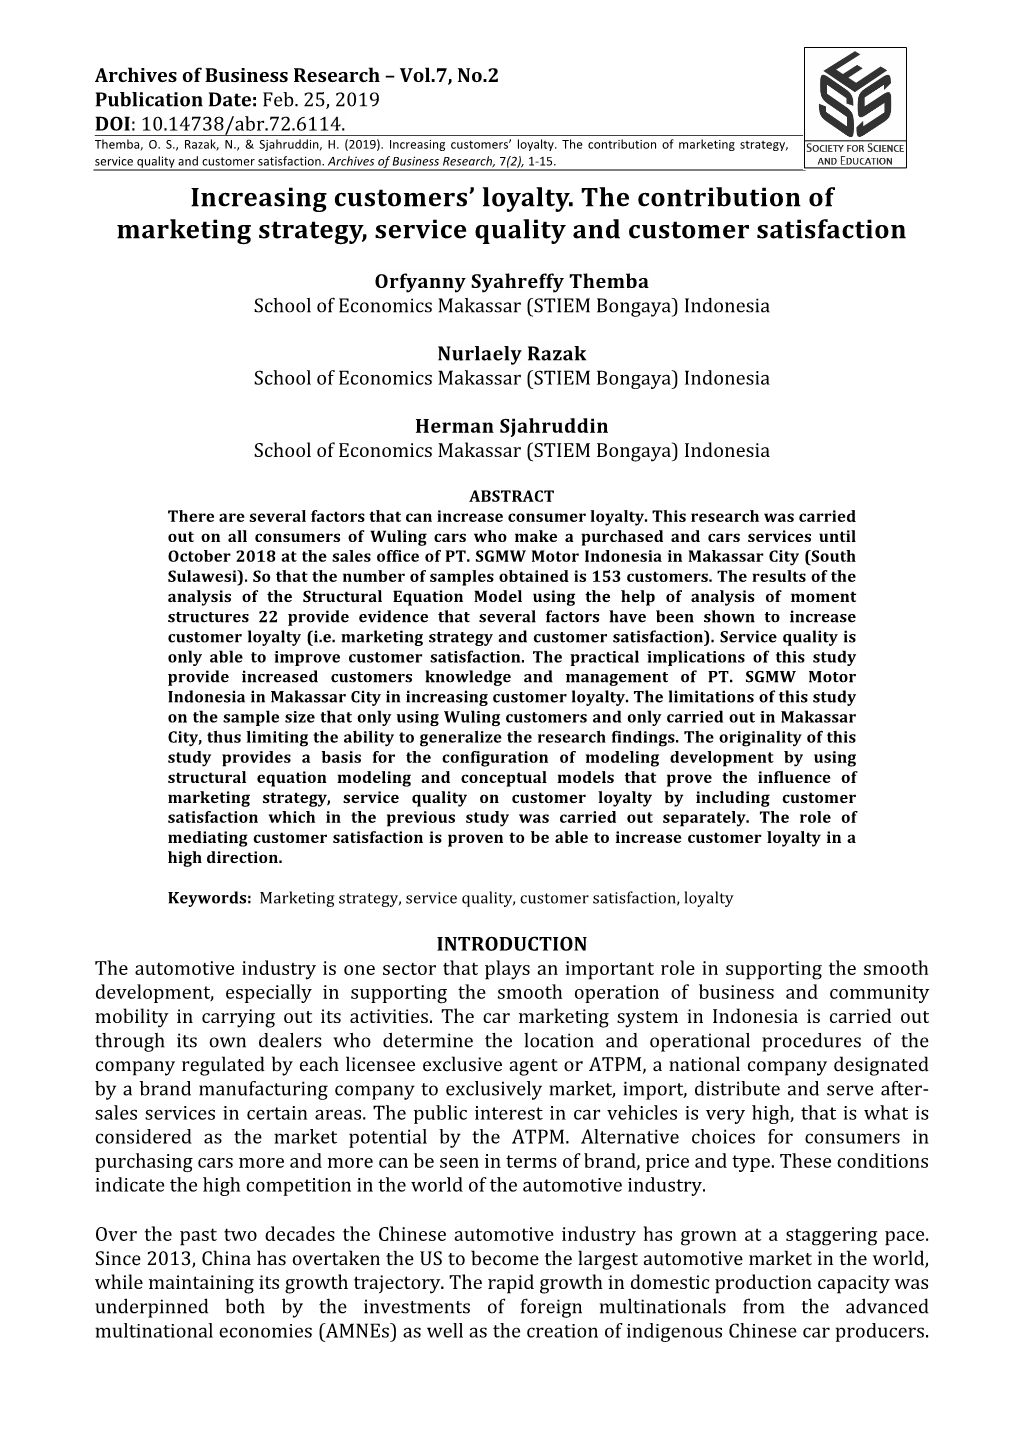 Increasing Customers' Loyalty. the Contribution of Marketing Strategy, Service Quality and Customer Satisfaction